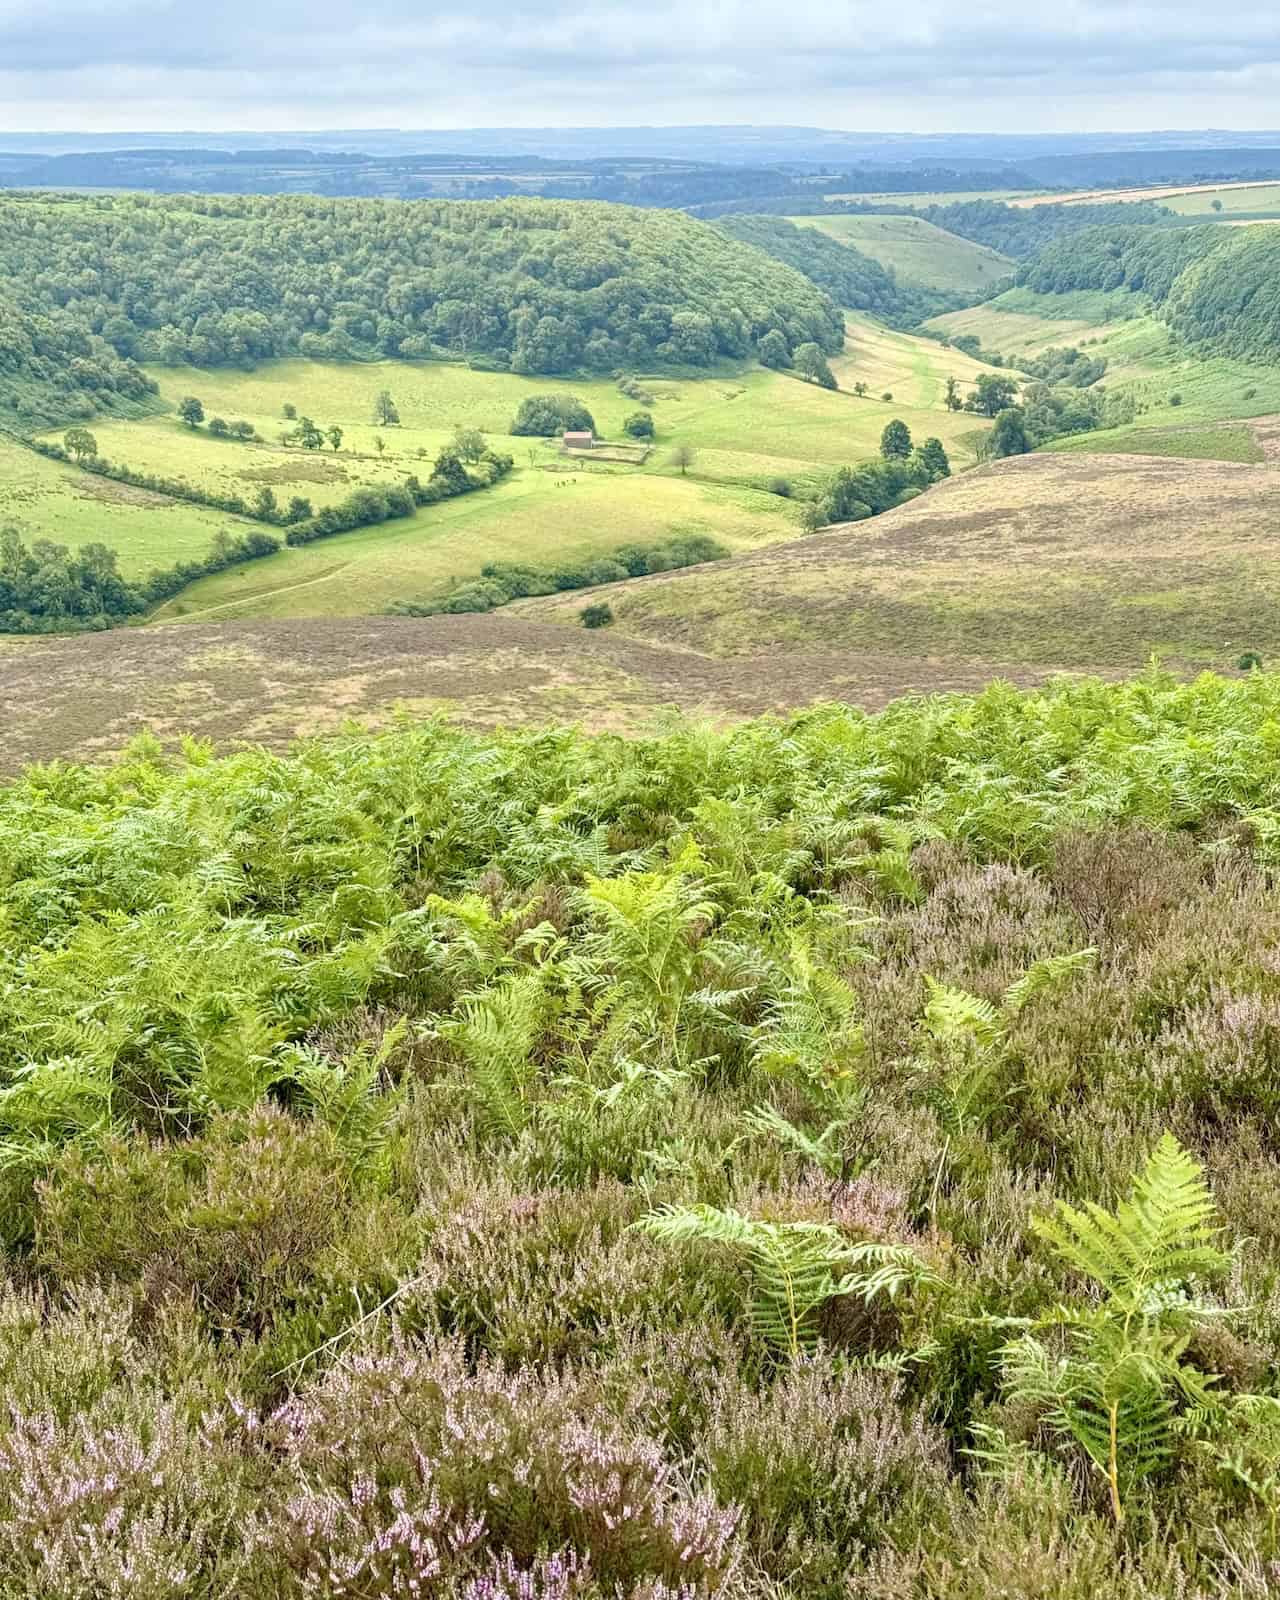 Southern view into the Hole of Horcum from the Tabular Hills Walk, revealing a dramatic hollow and the barn at Low Horcum surrounded by a dry stone wall.